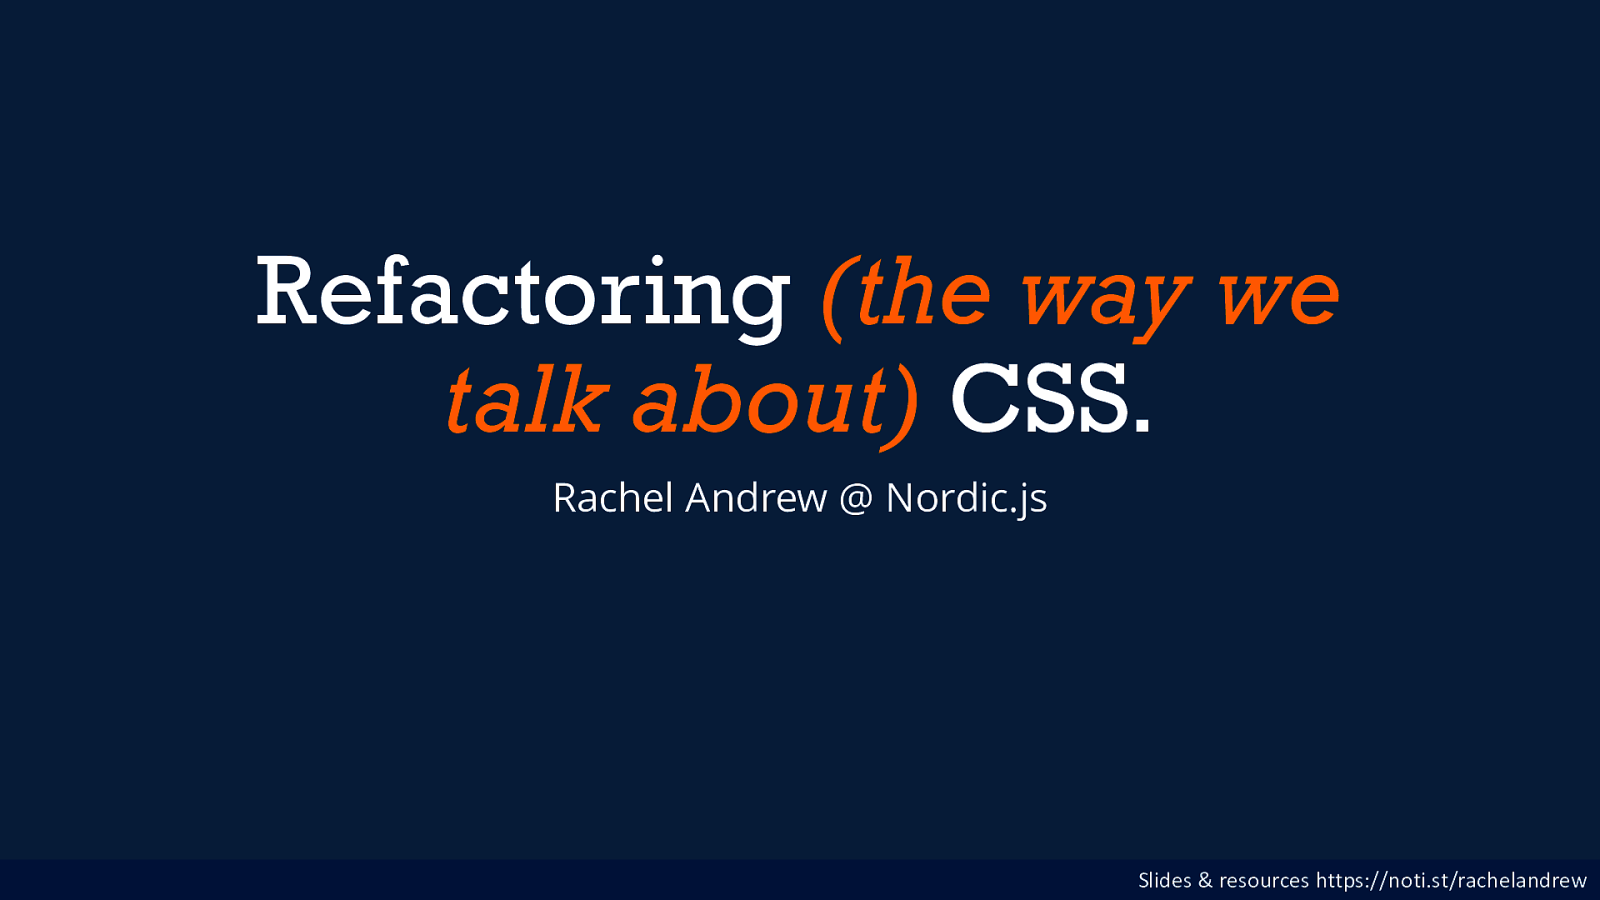 Refactoring (the way we talk about) CSS